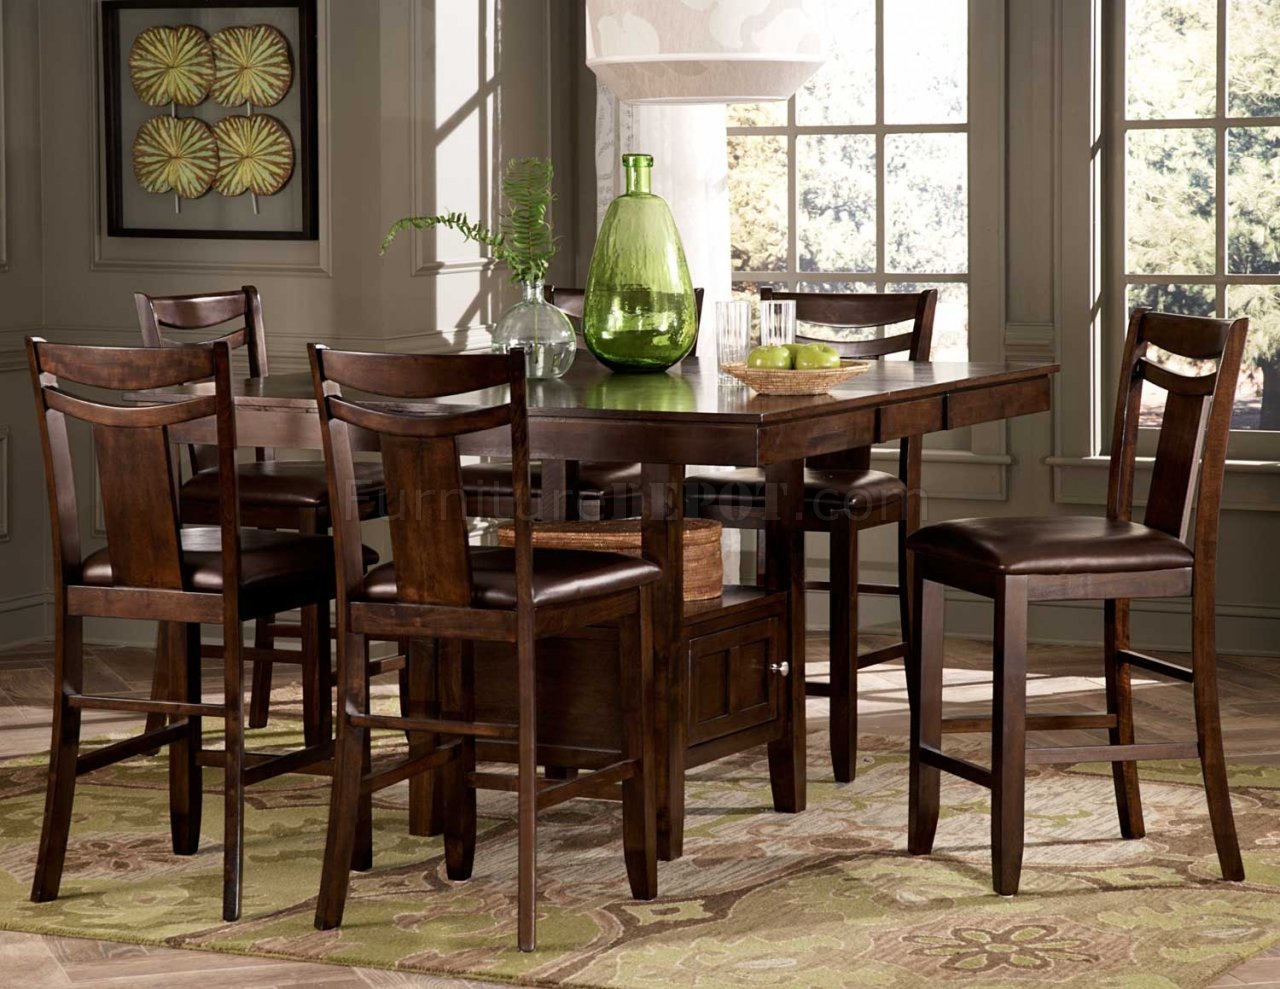 Broome 2524-36 Counter Height Dining 5Pc Set by Homelegance
